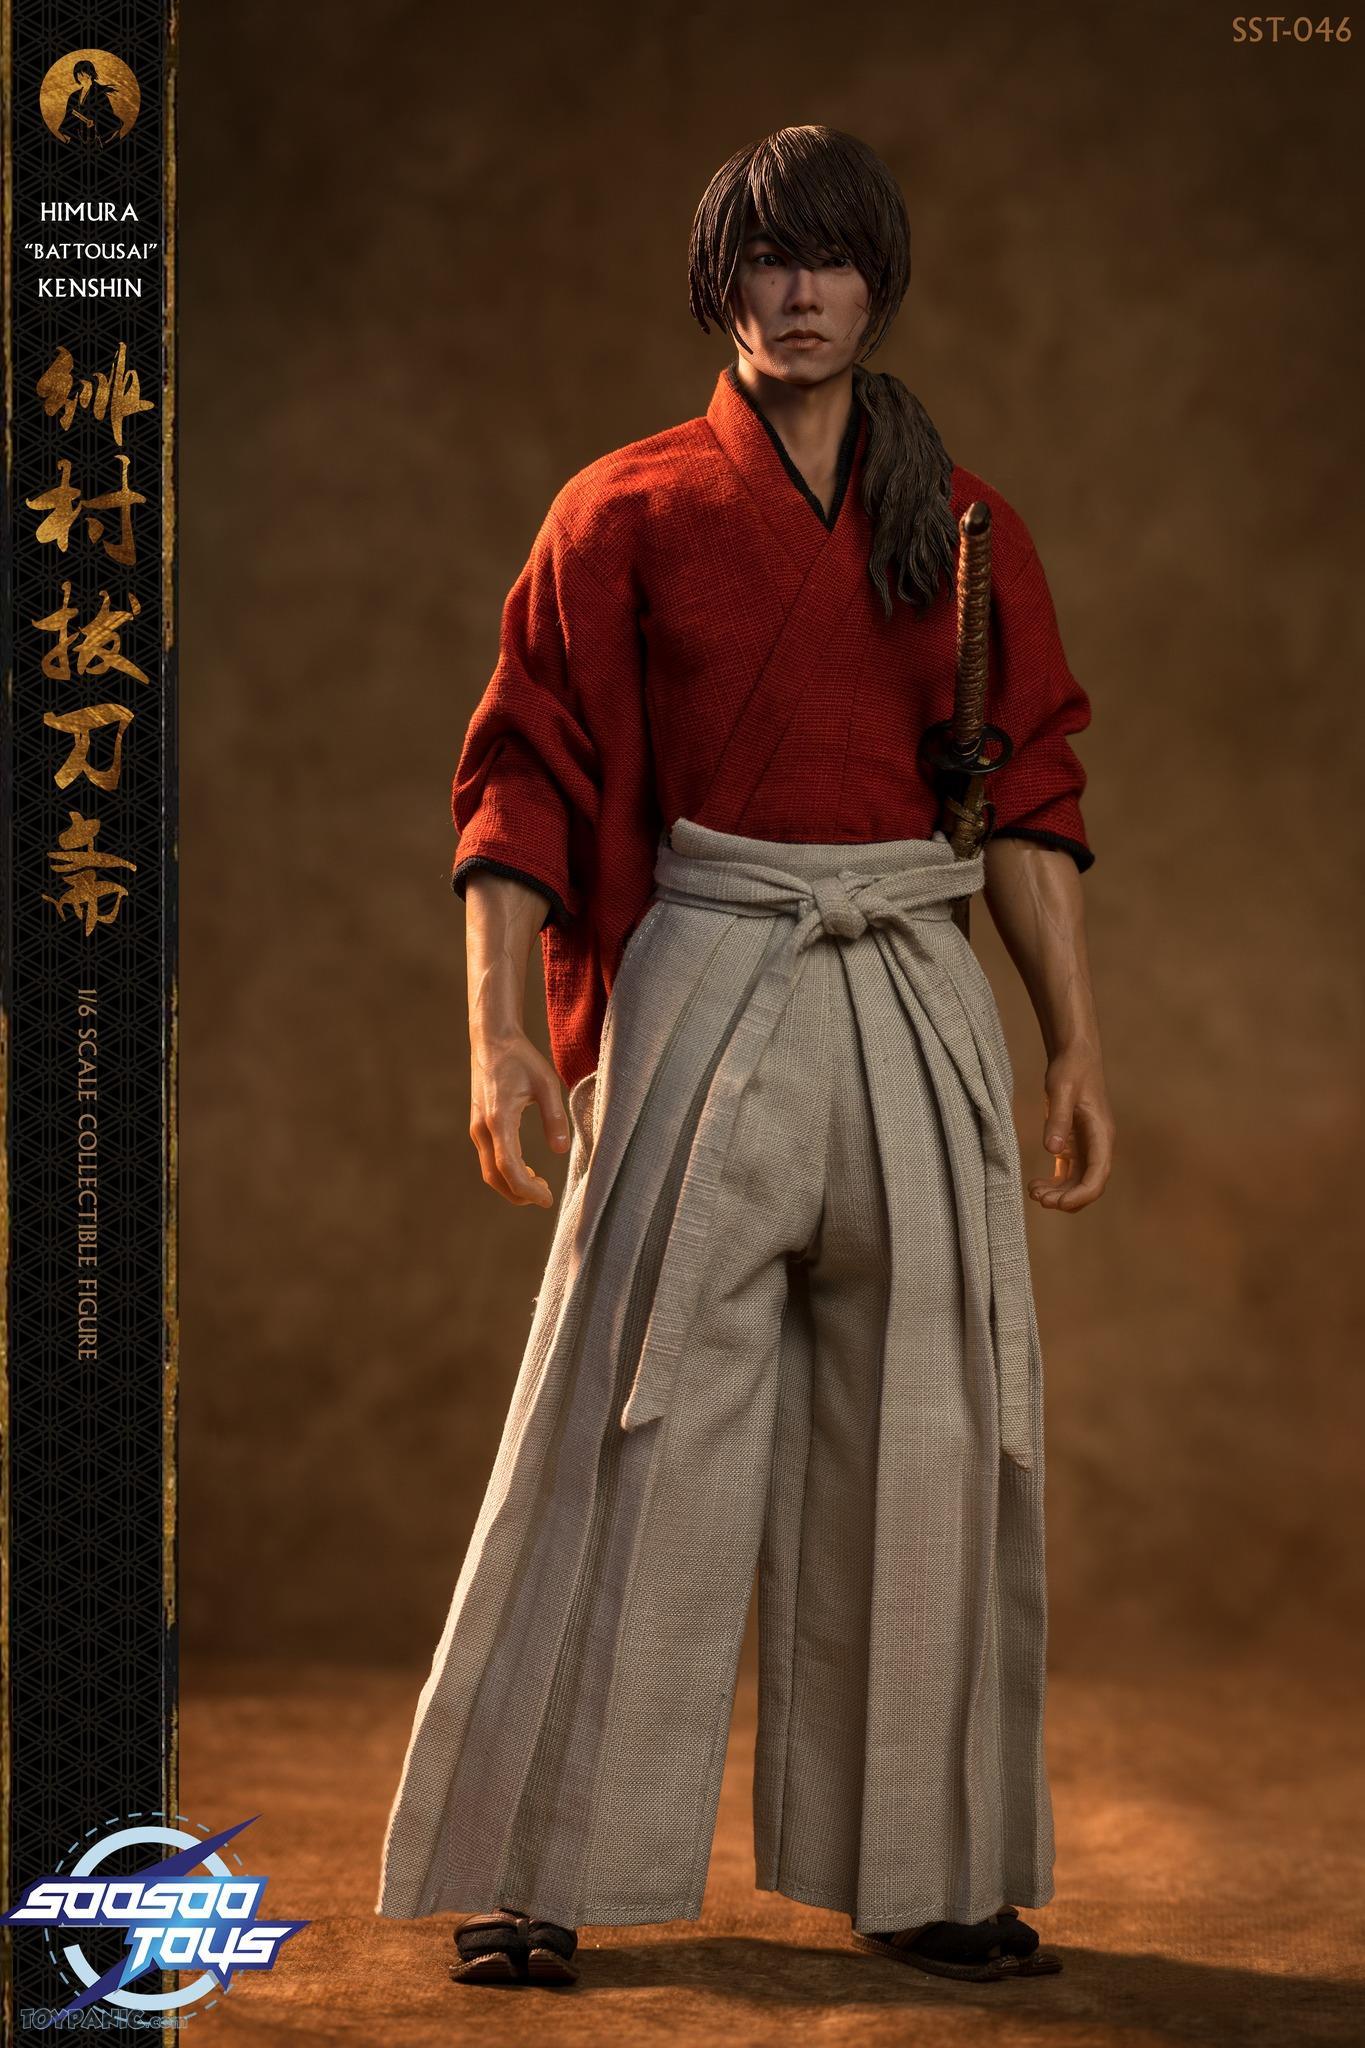 NEW PRODUCT: 1/6 scale Rurouni Kenshin Collectible Figure from SooSooToys 712202251233PM_9426670